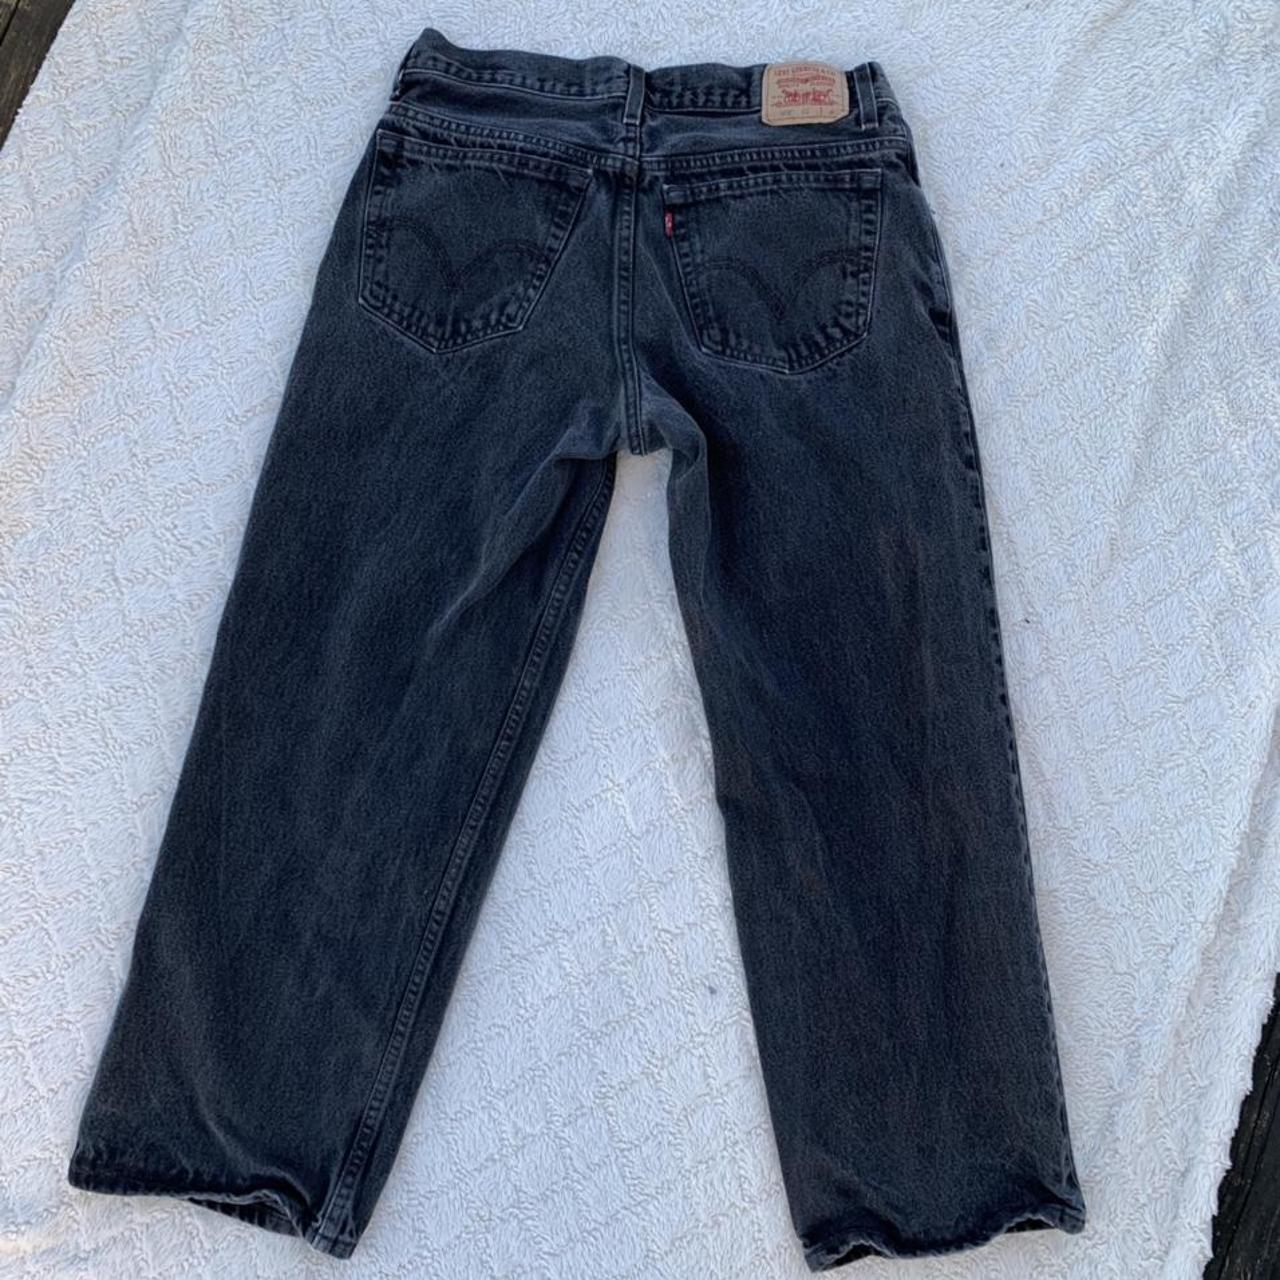 Product Image 2 - Authentic 90’s vintage Levi’s in